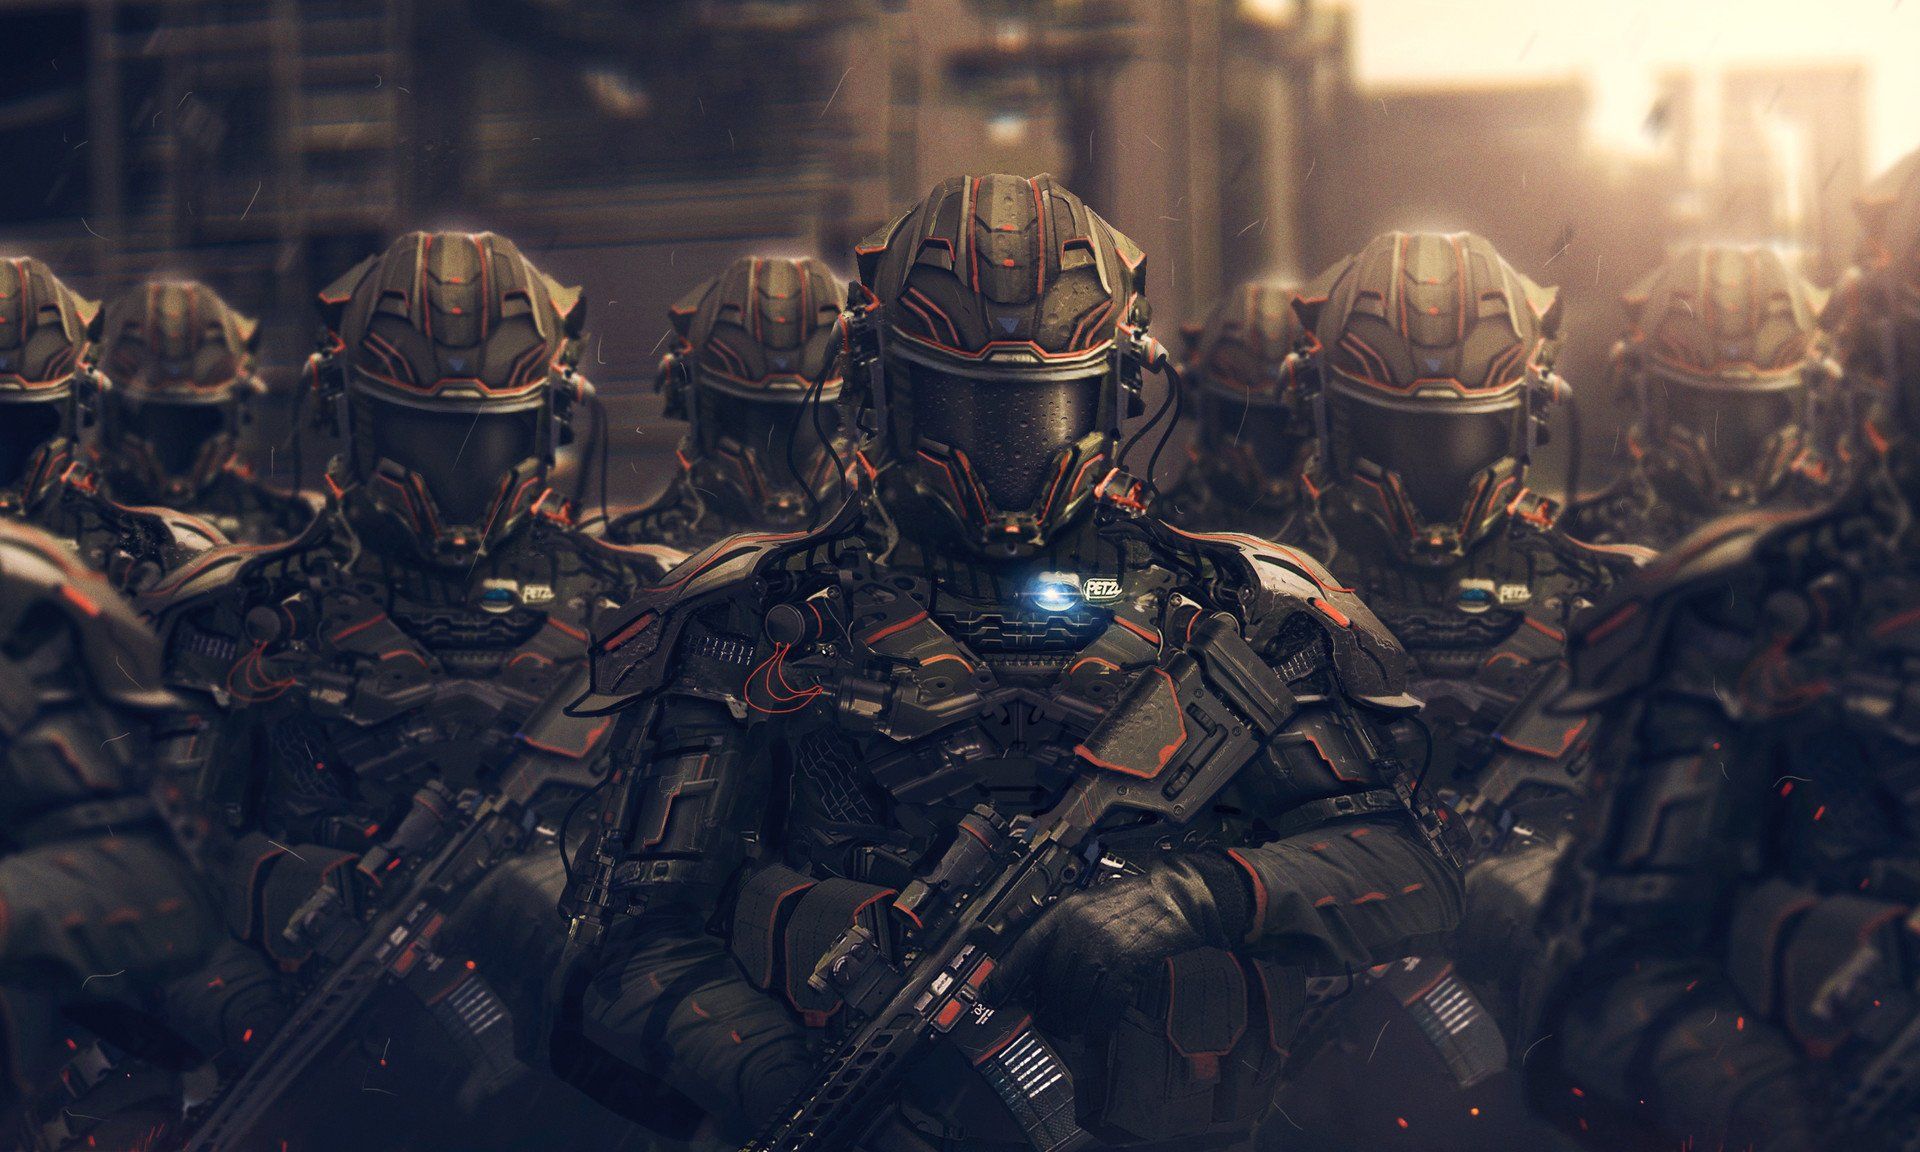 Art Military Wallpapers